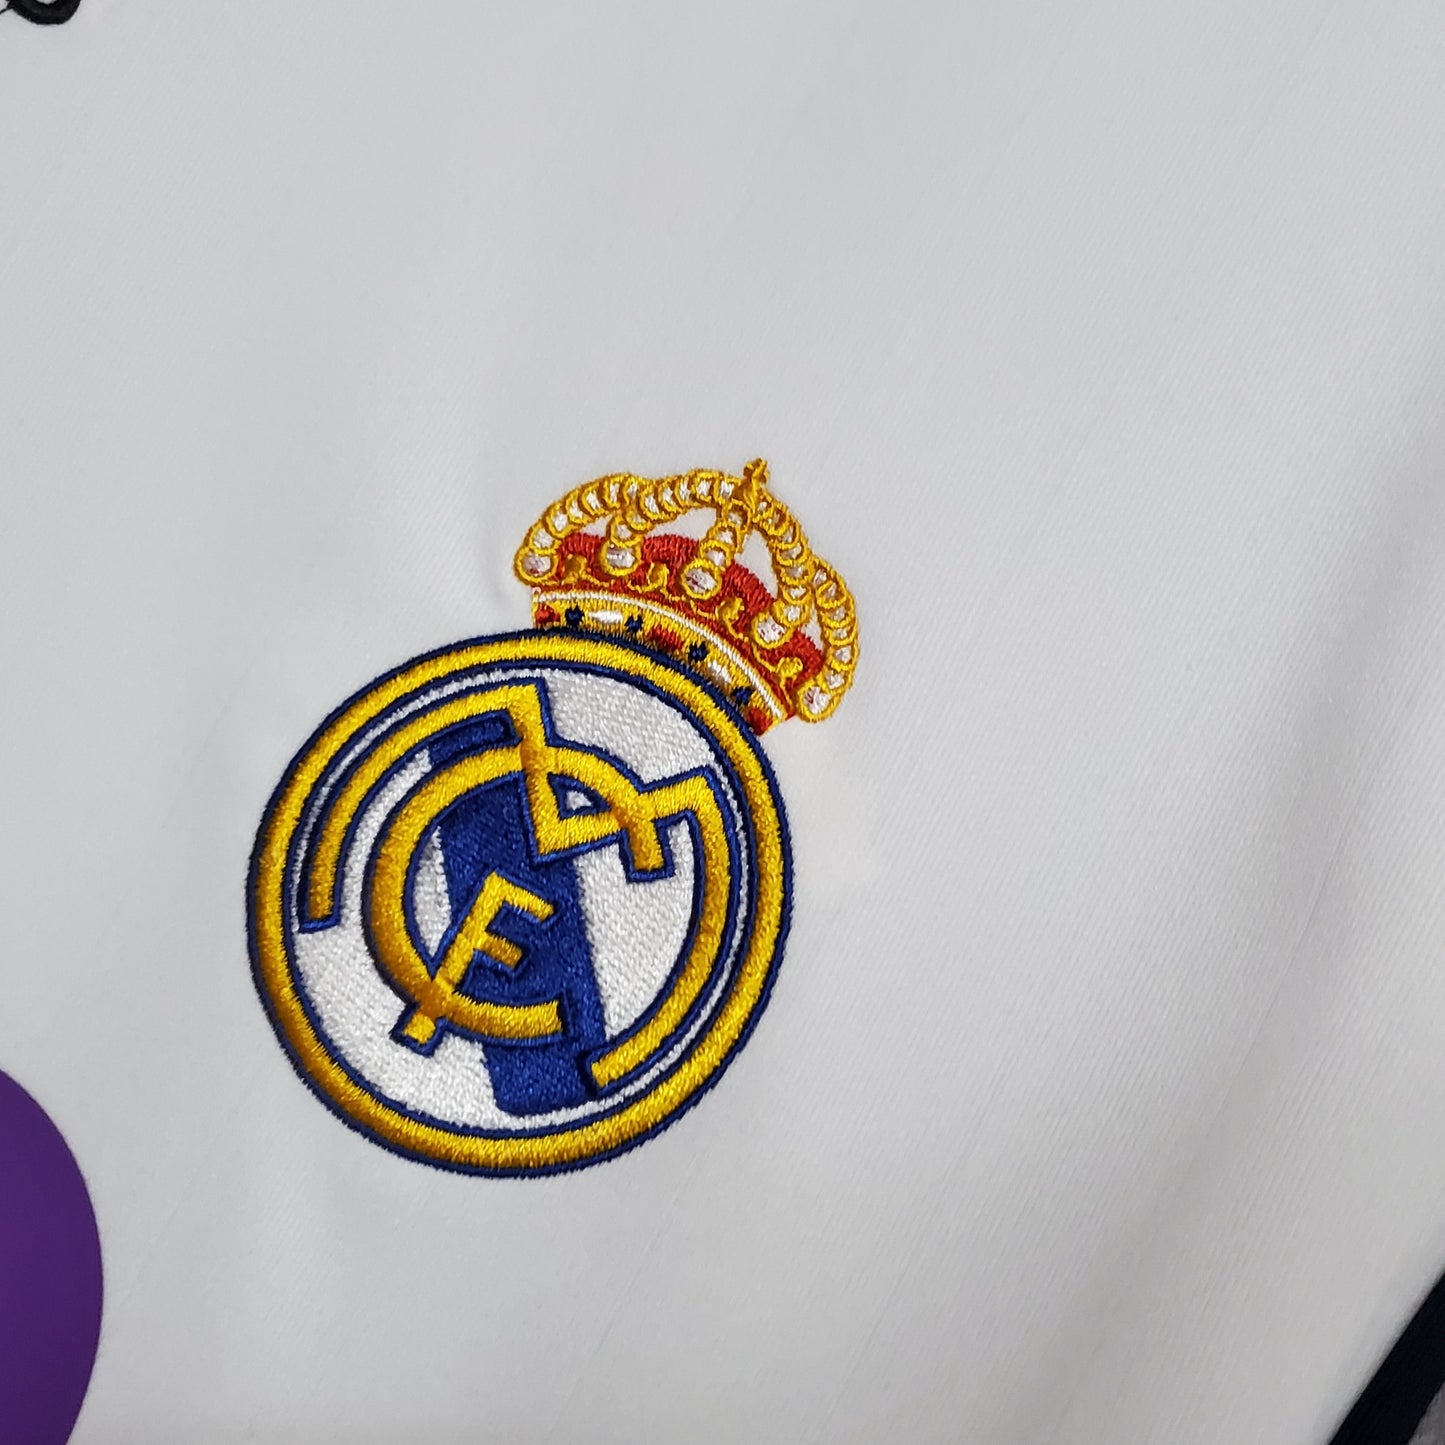 REAL MADRID 2006 - 2007 HOME JERSEY